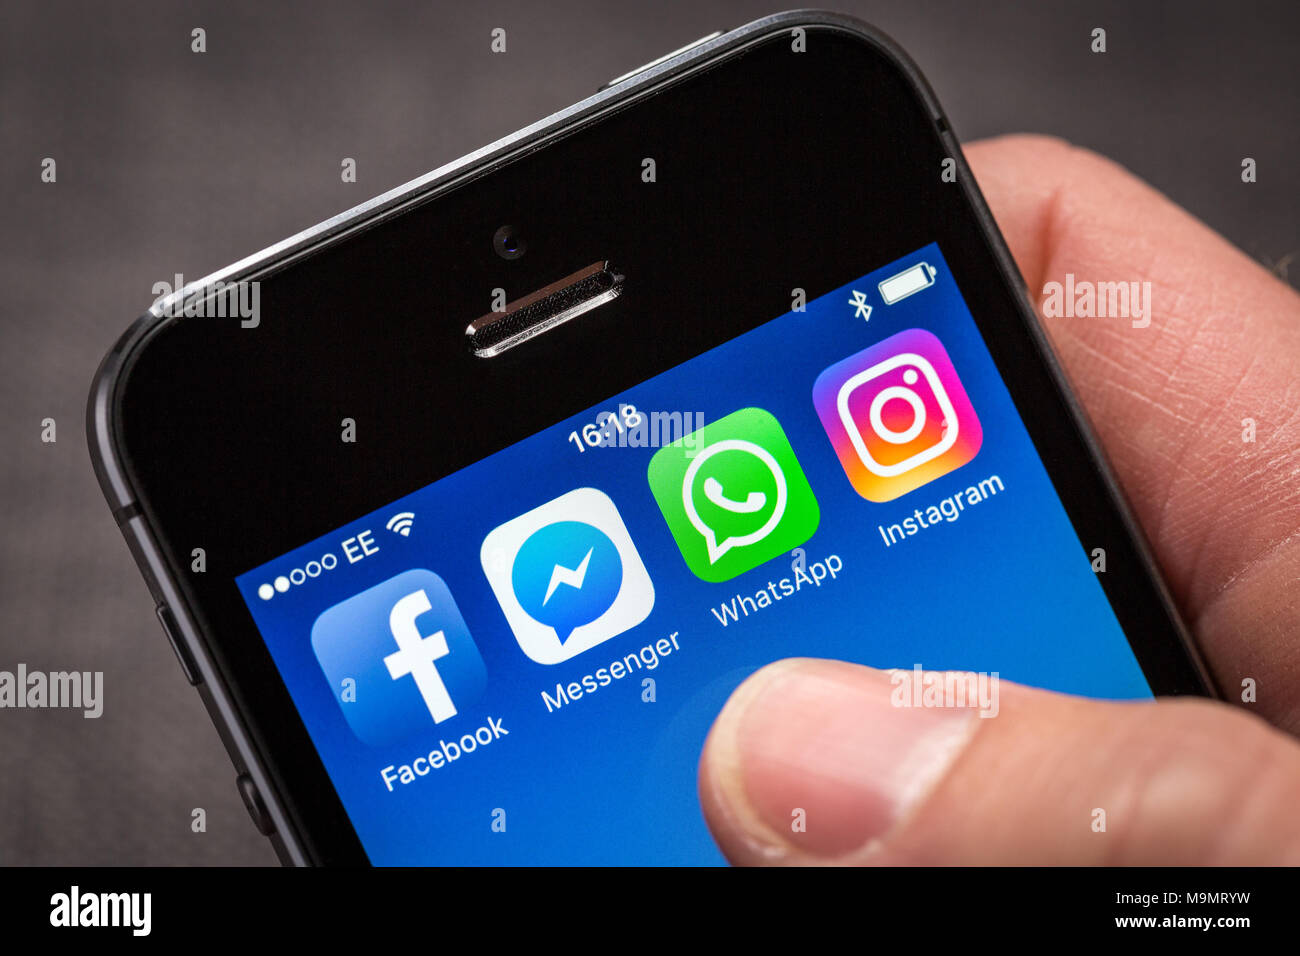 Facebook and associated social media company apps, Facebook Messenger, WhatsApp and Instagram on an iPhone Stock Photo